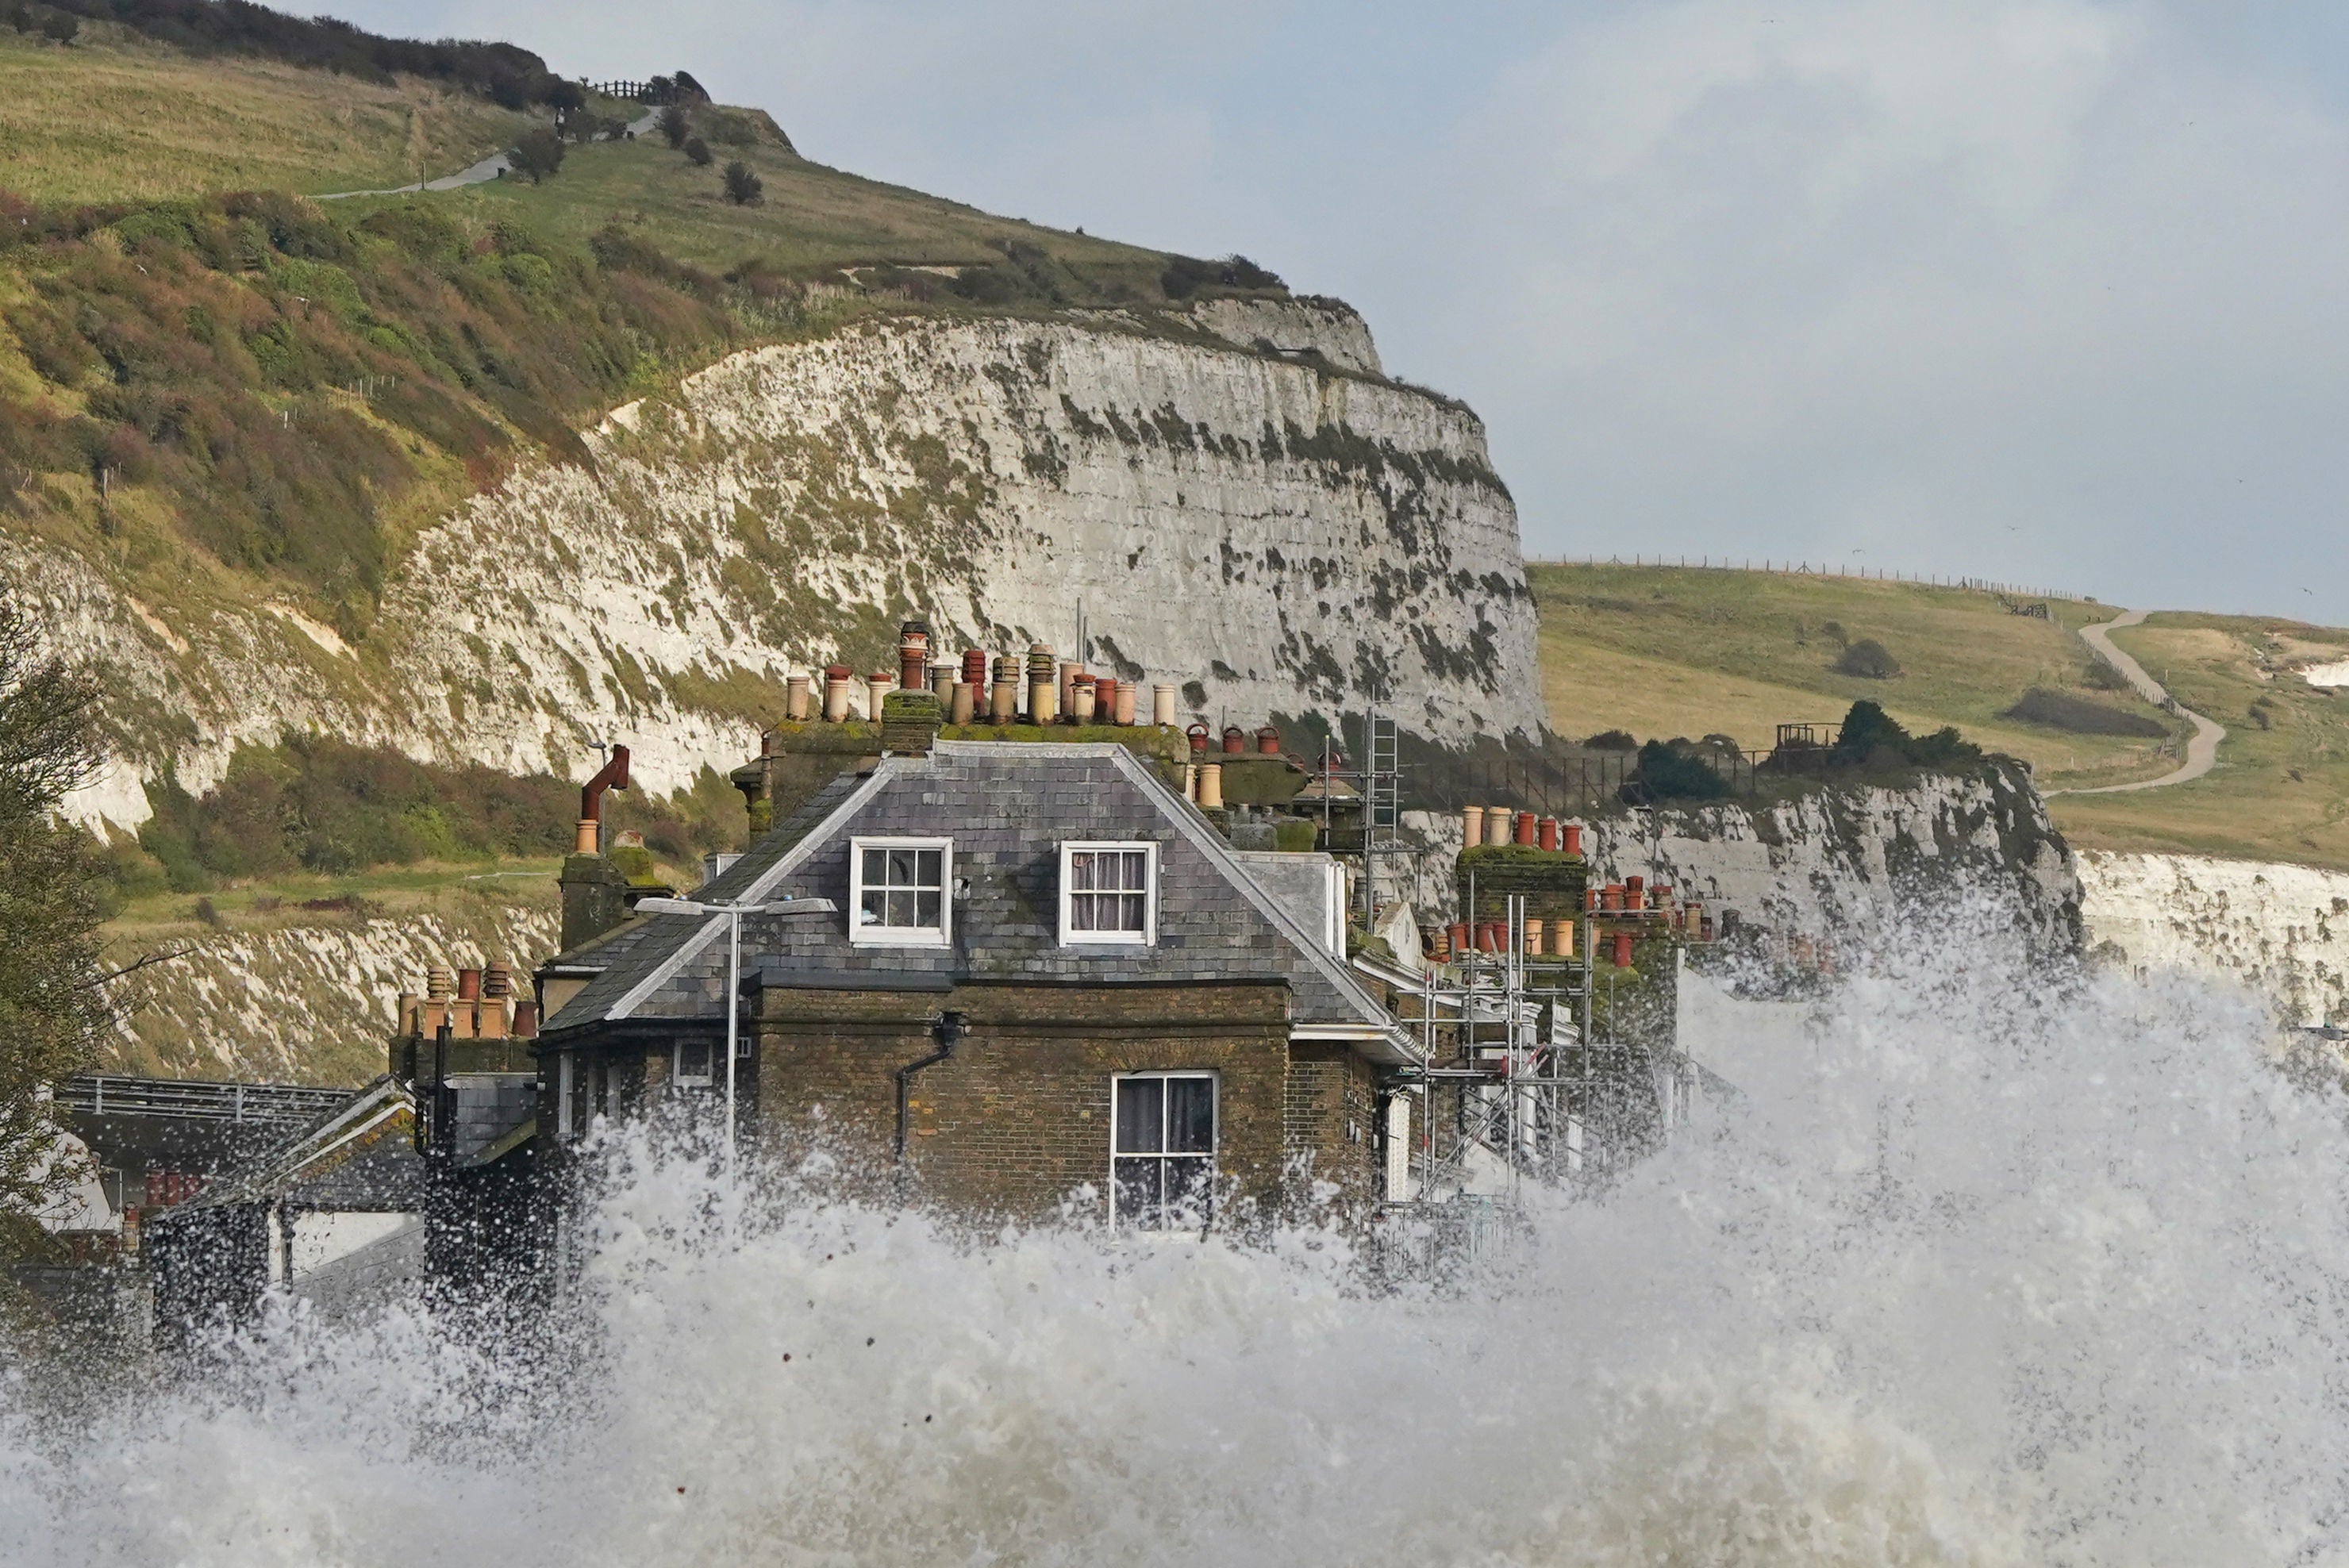 The storm has battered the south coast of England this week